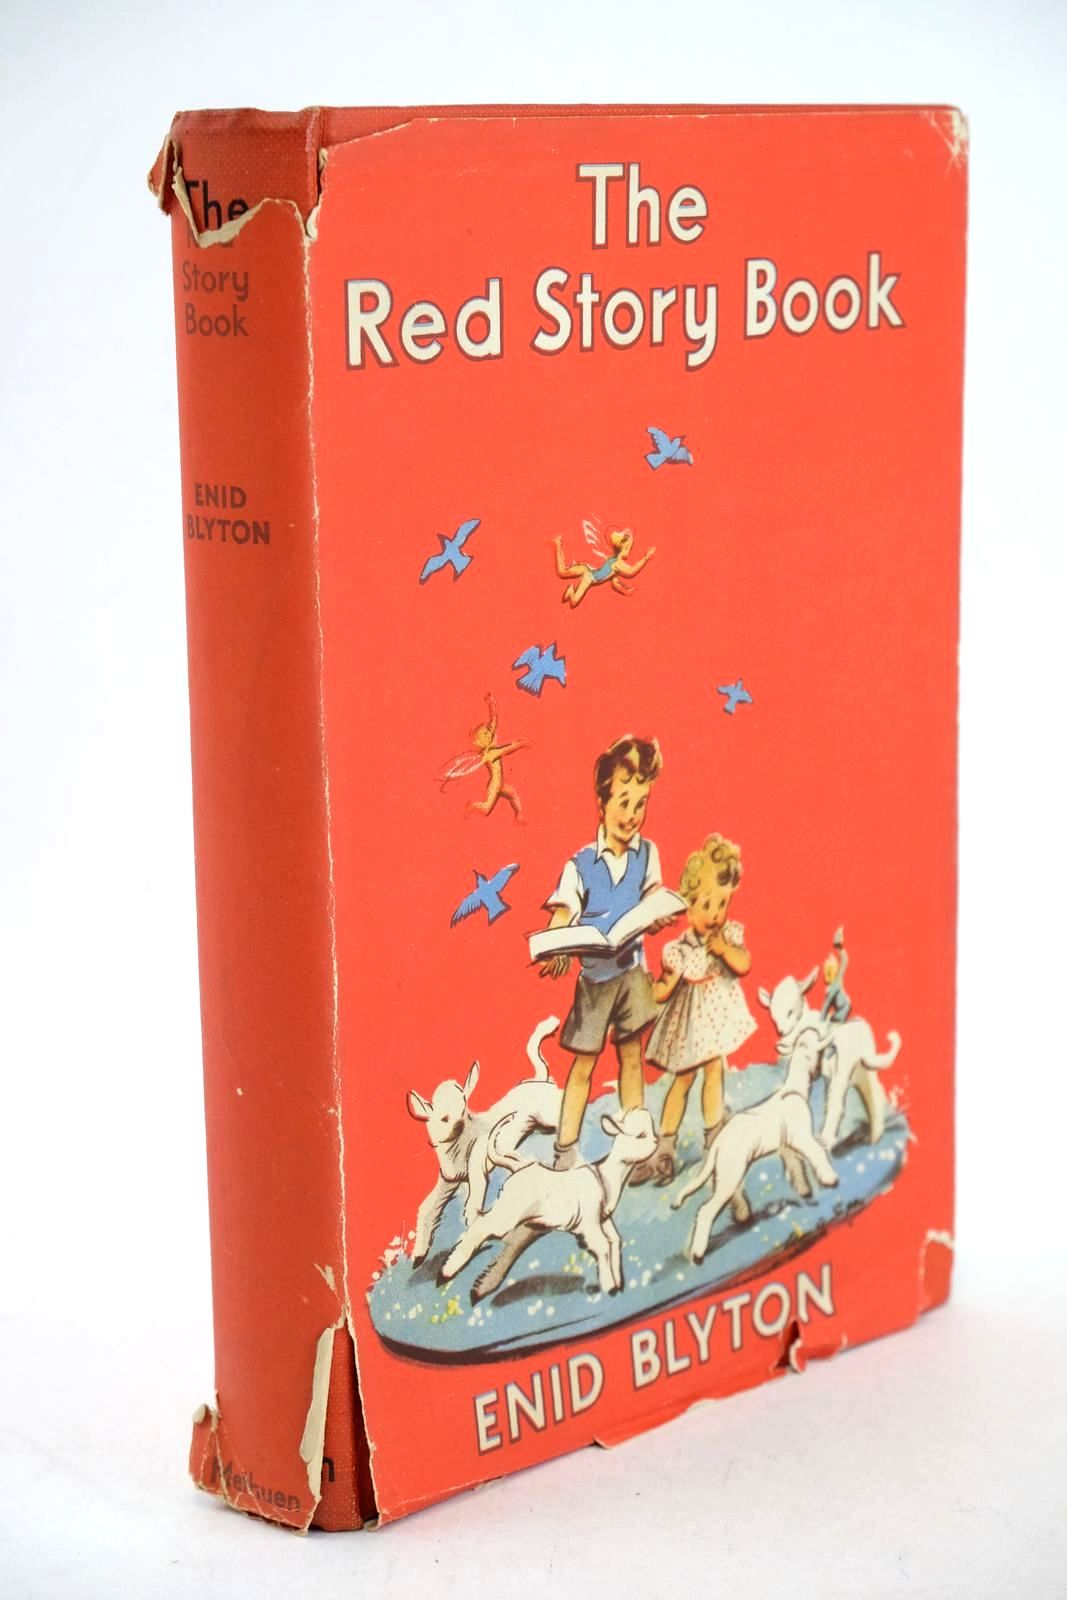 Cover of THE RED STORY BOOK by Enid Blyton